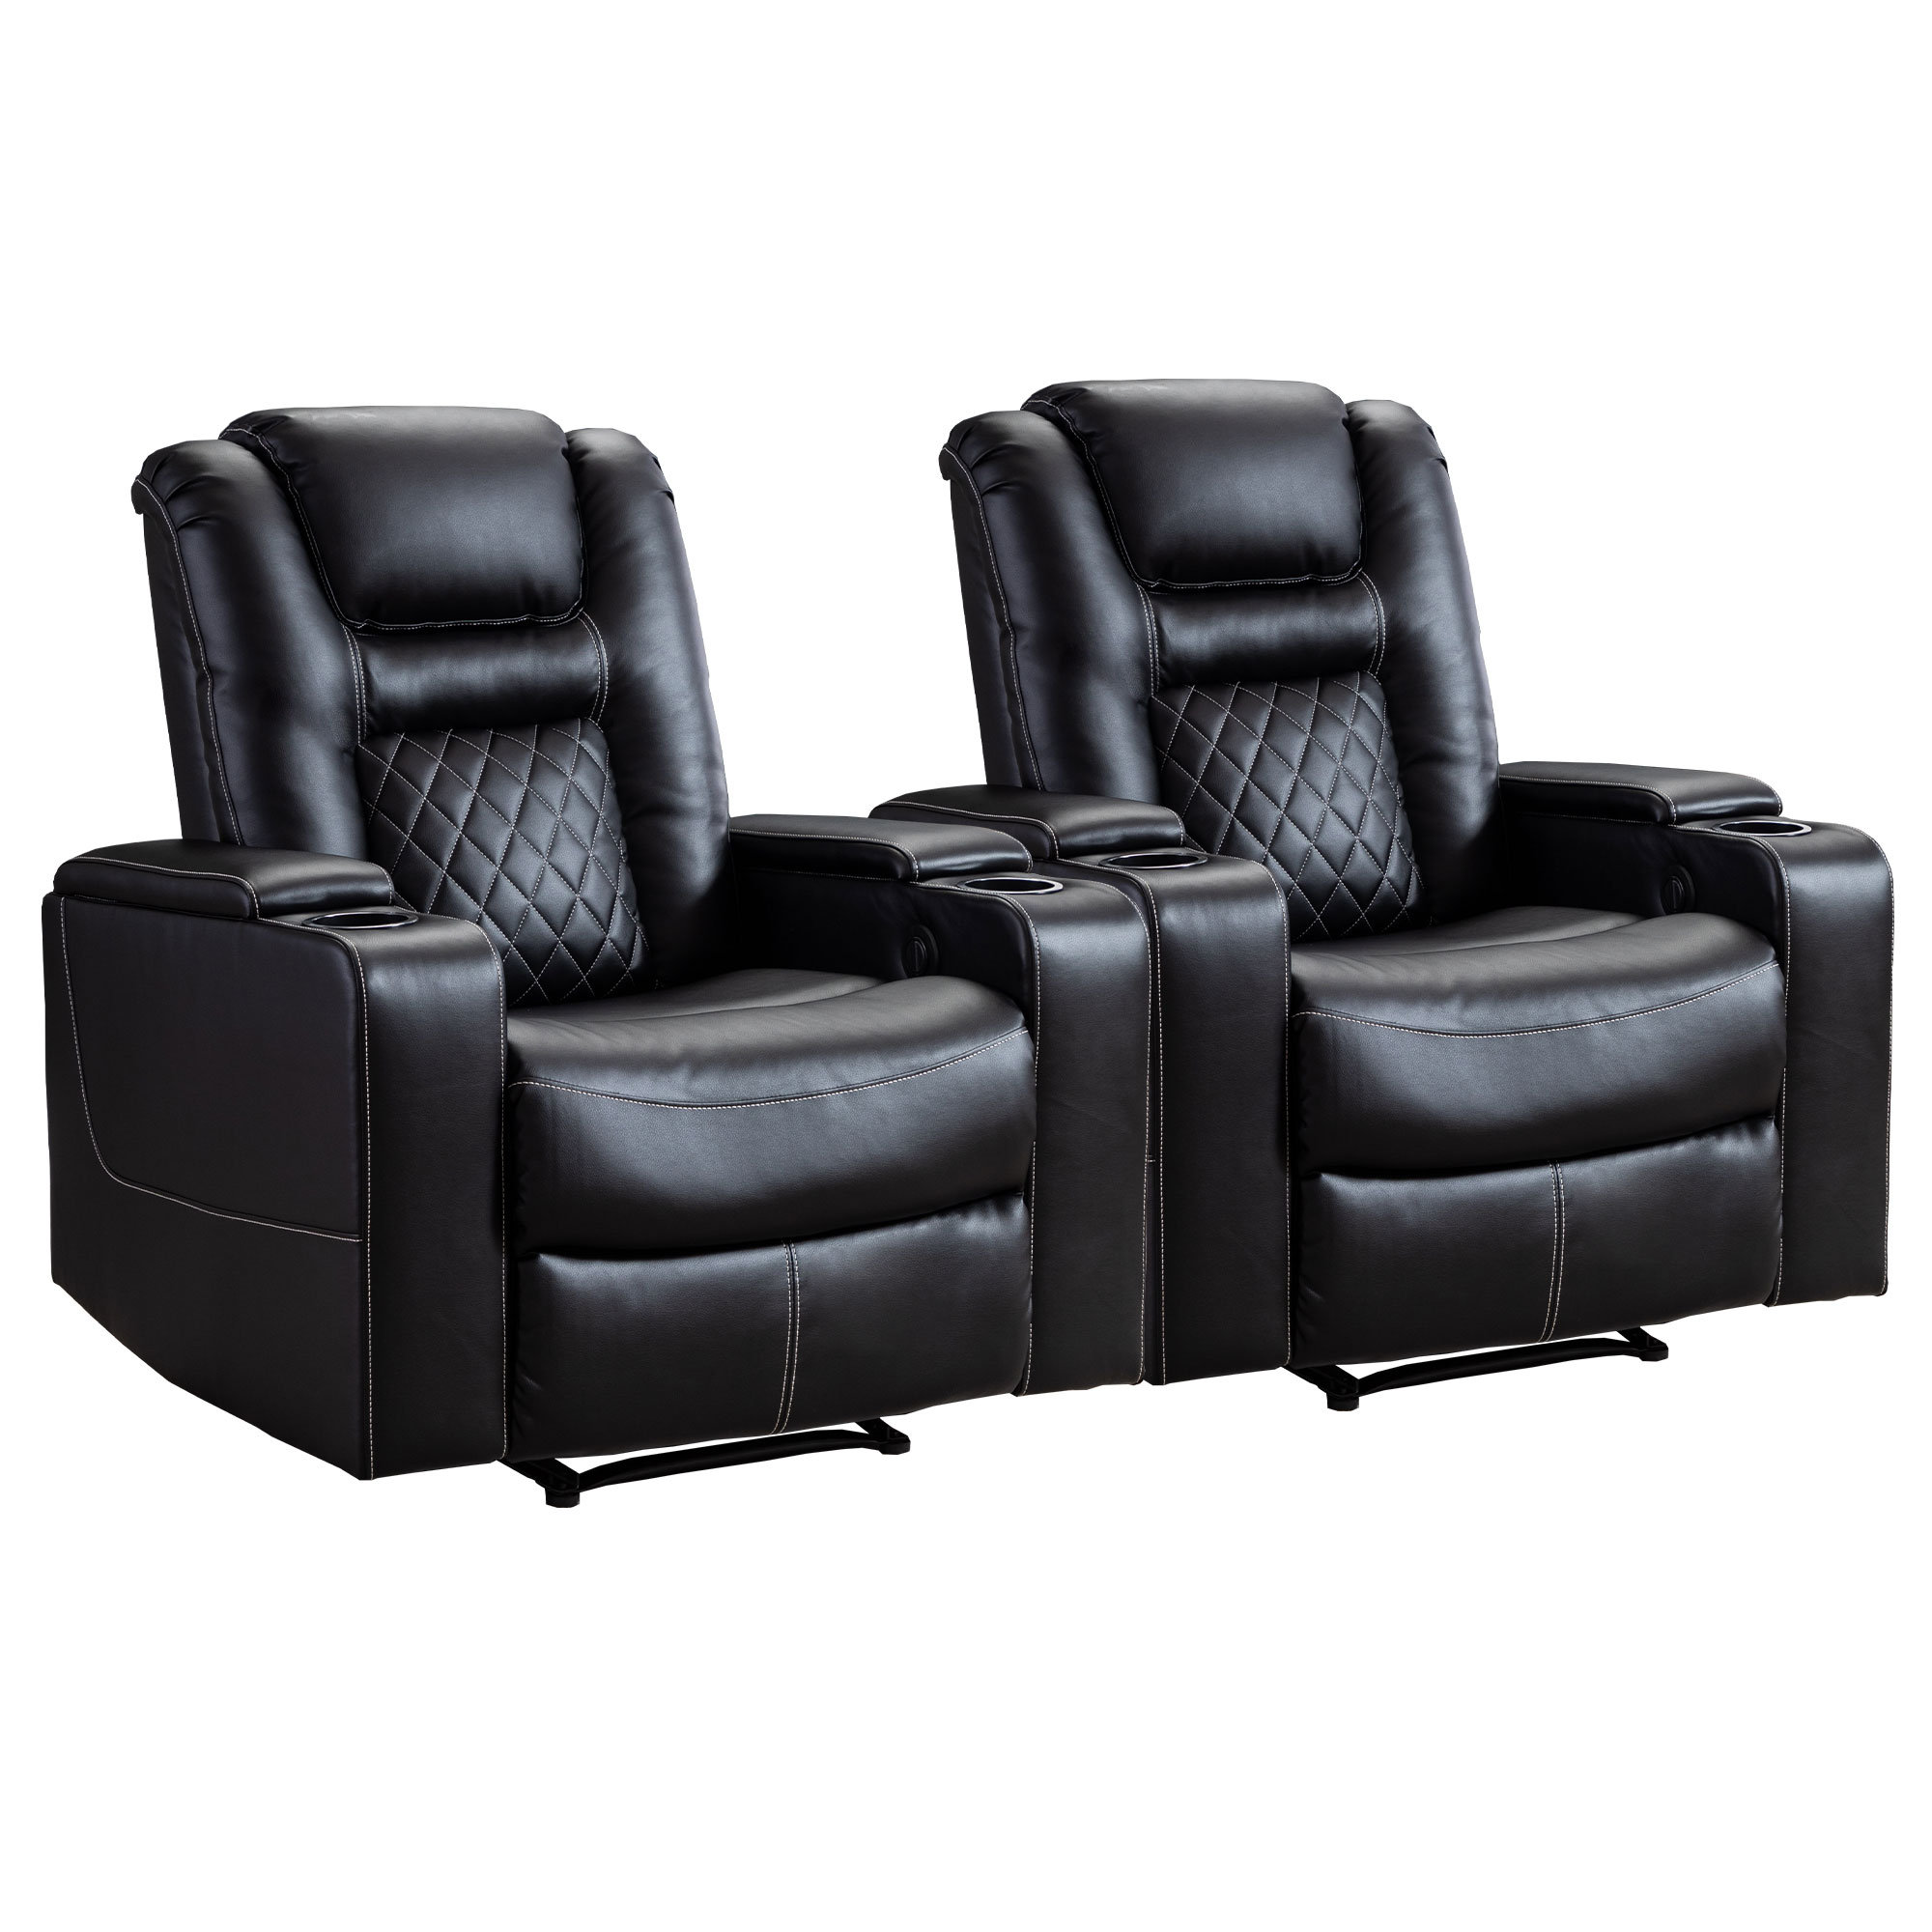 Recliner Chair Leather Modern Single Reclining Sofa Home Theater Seating  Black